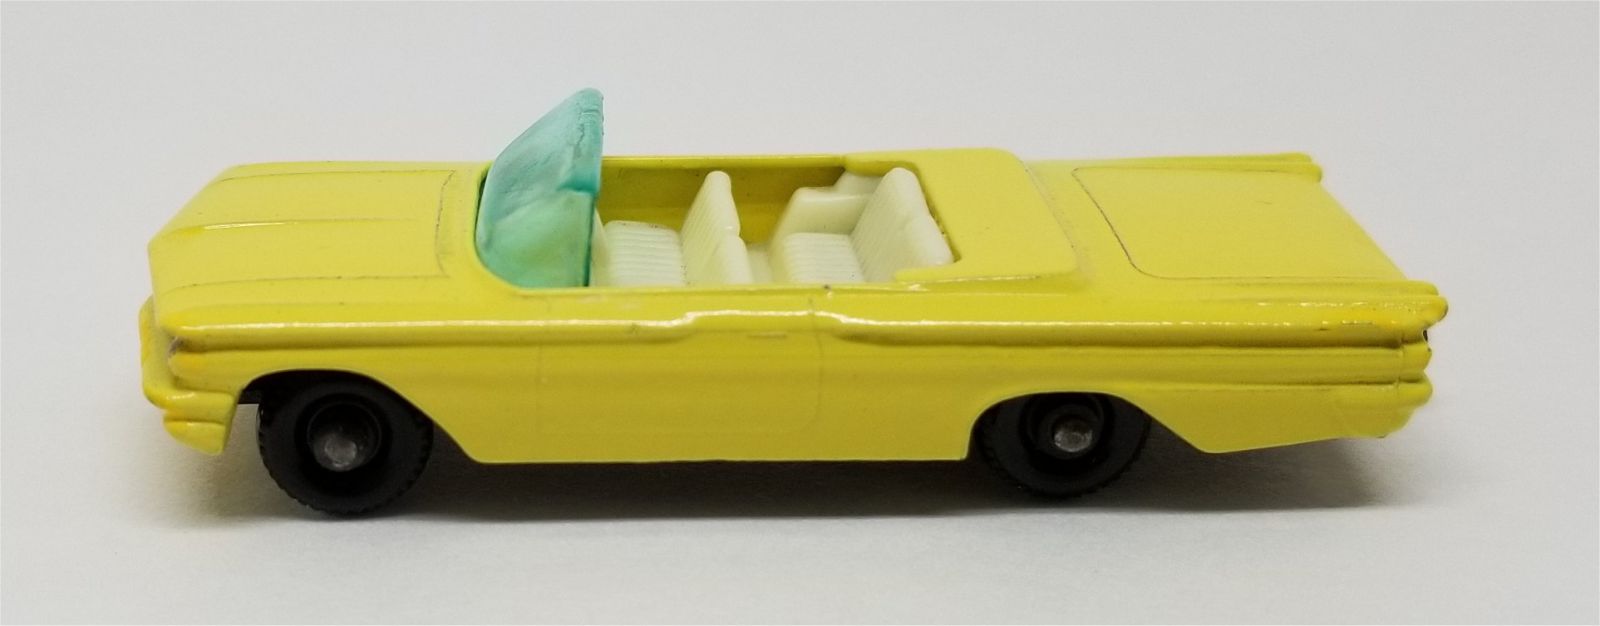 Illustration for article titled [REVIEW] Lesney Matchbox Pontiac Convertible